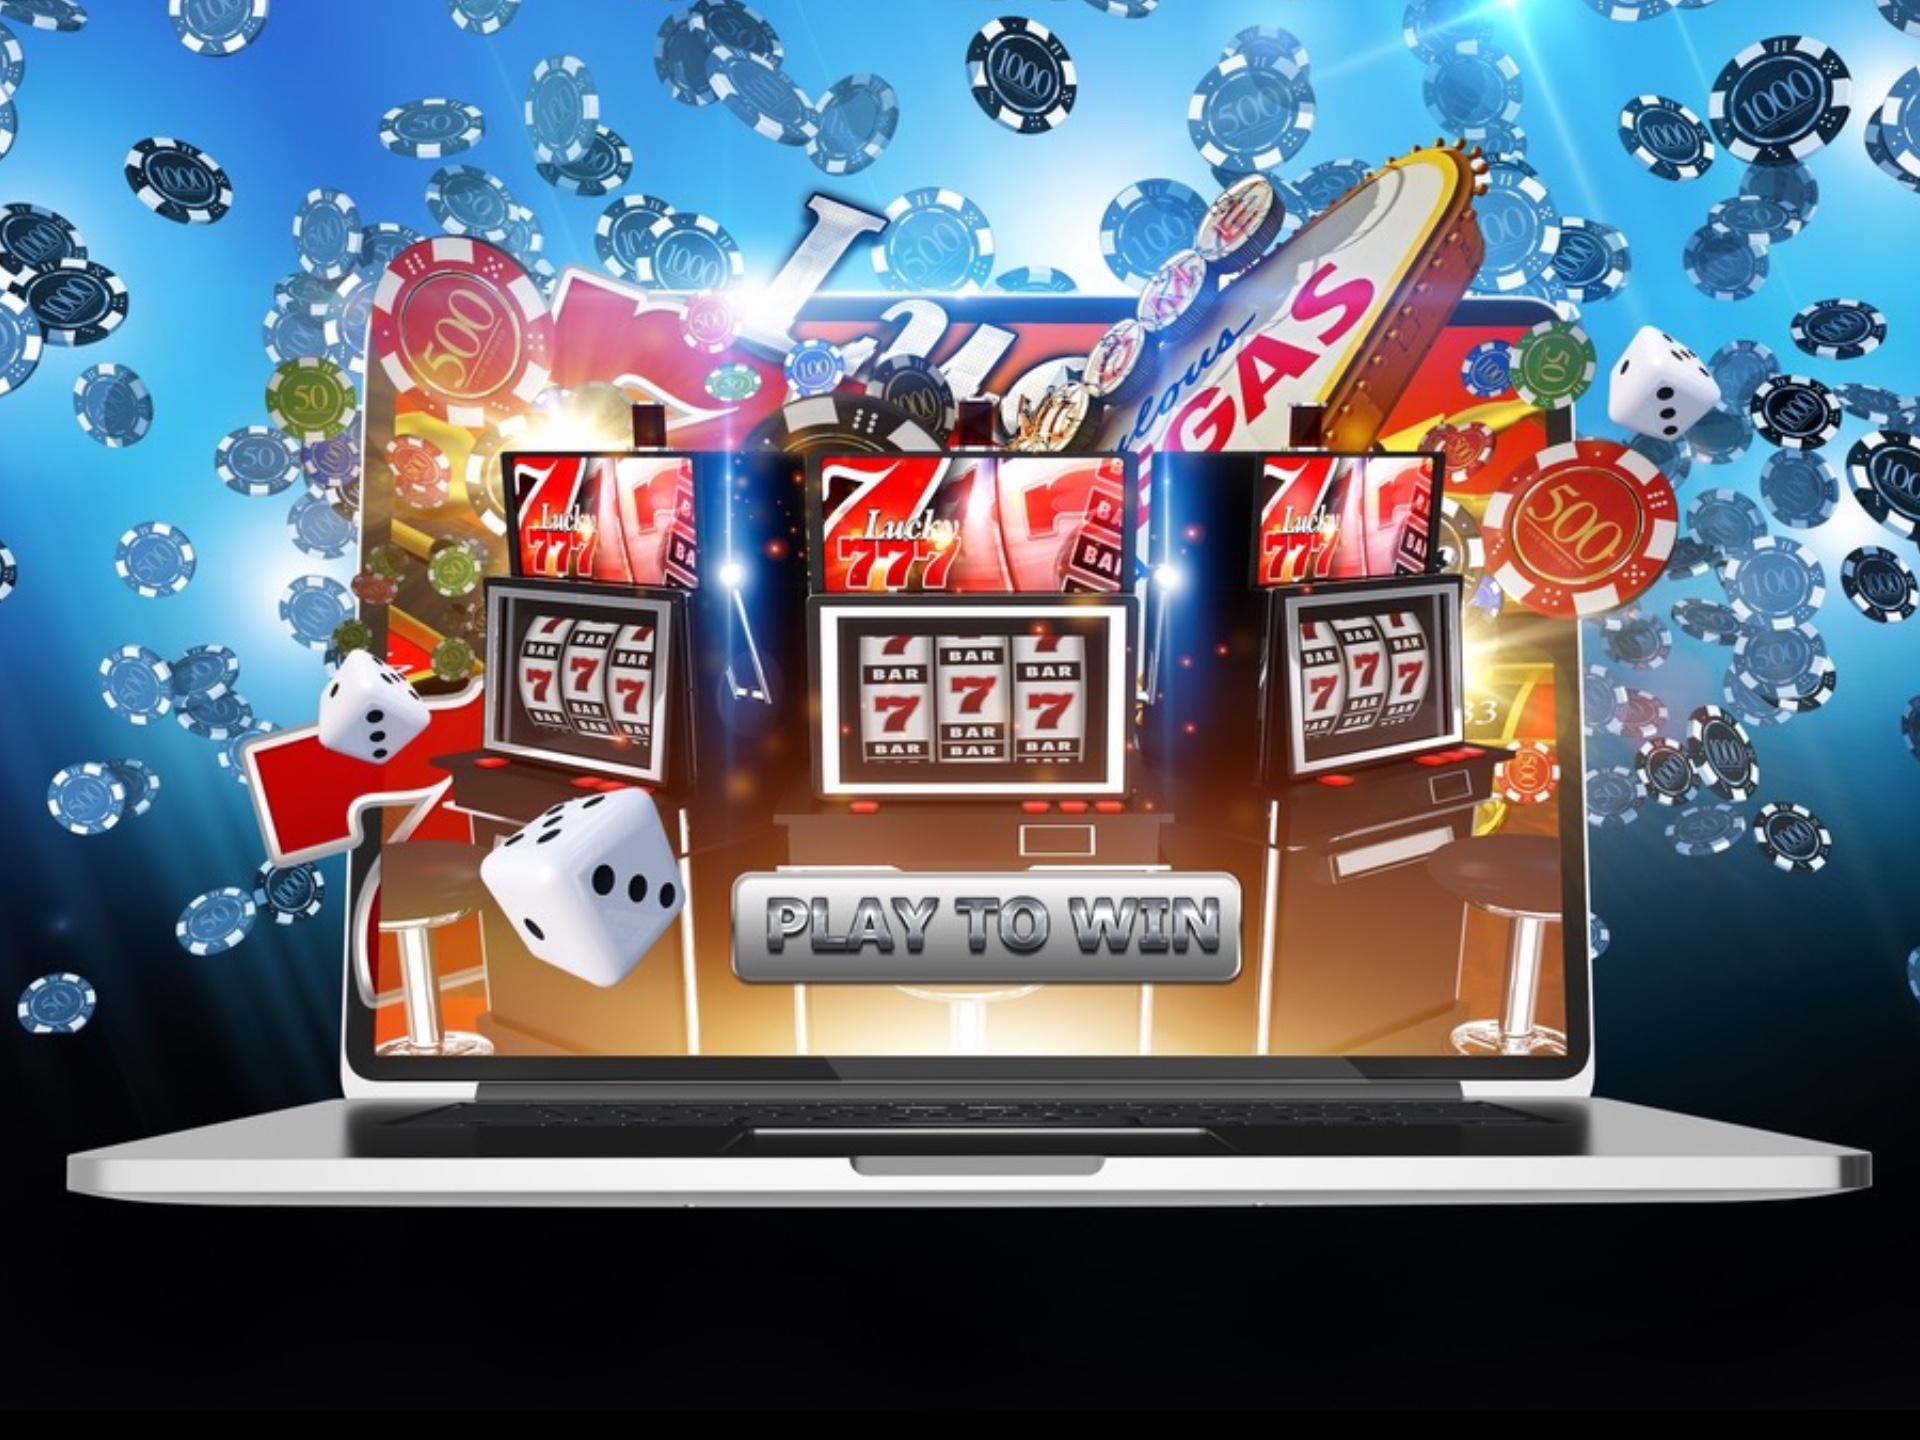 If you want to play great online slots choose the best online casinos in India.